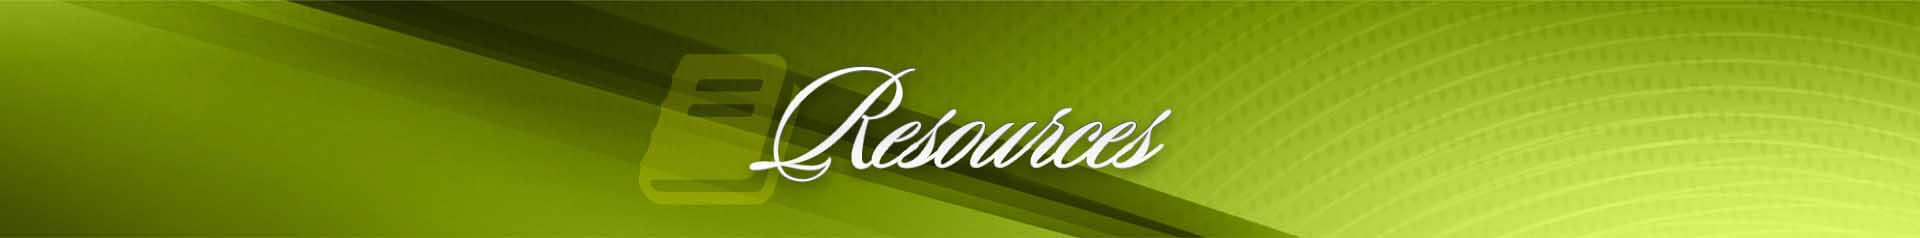 Resurgence counseling services